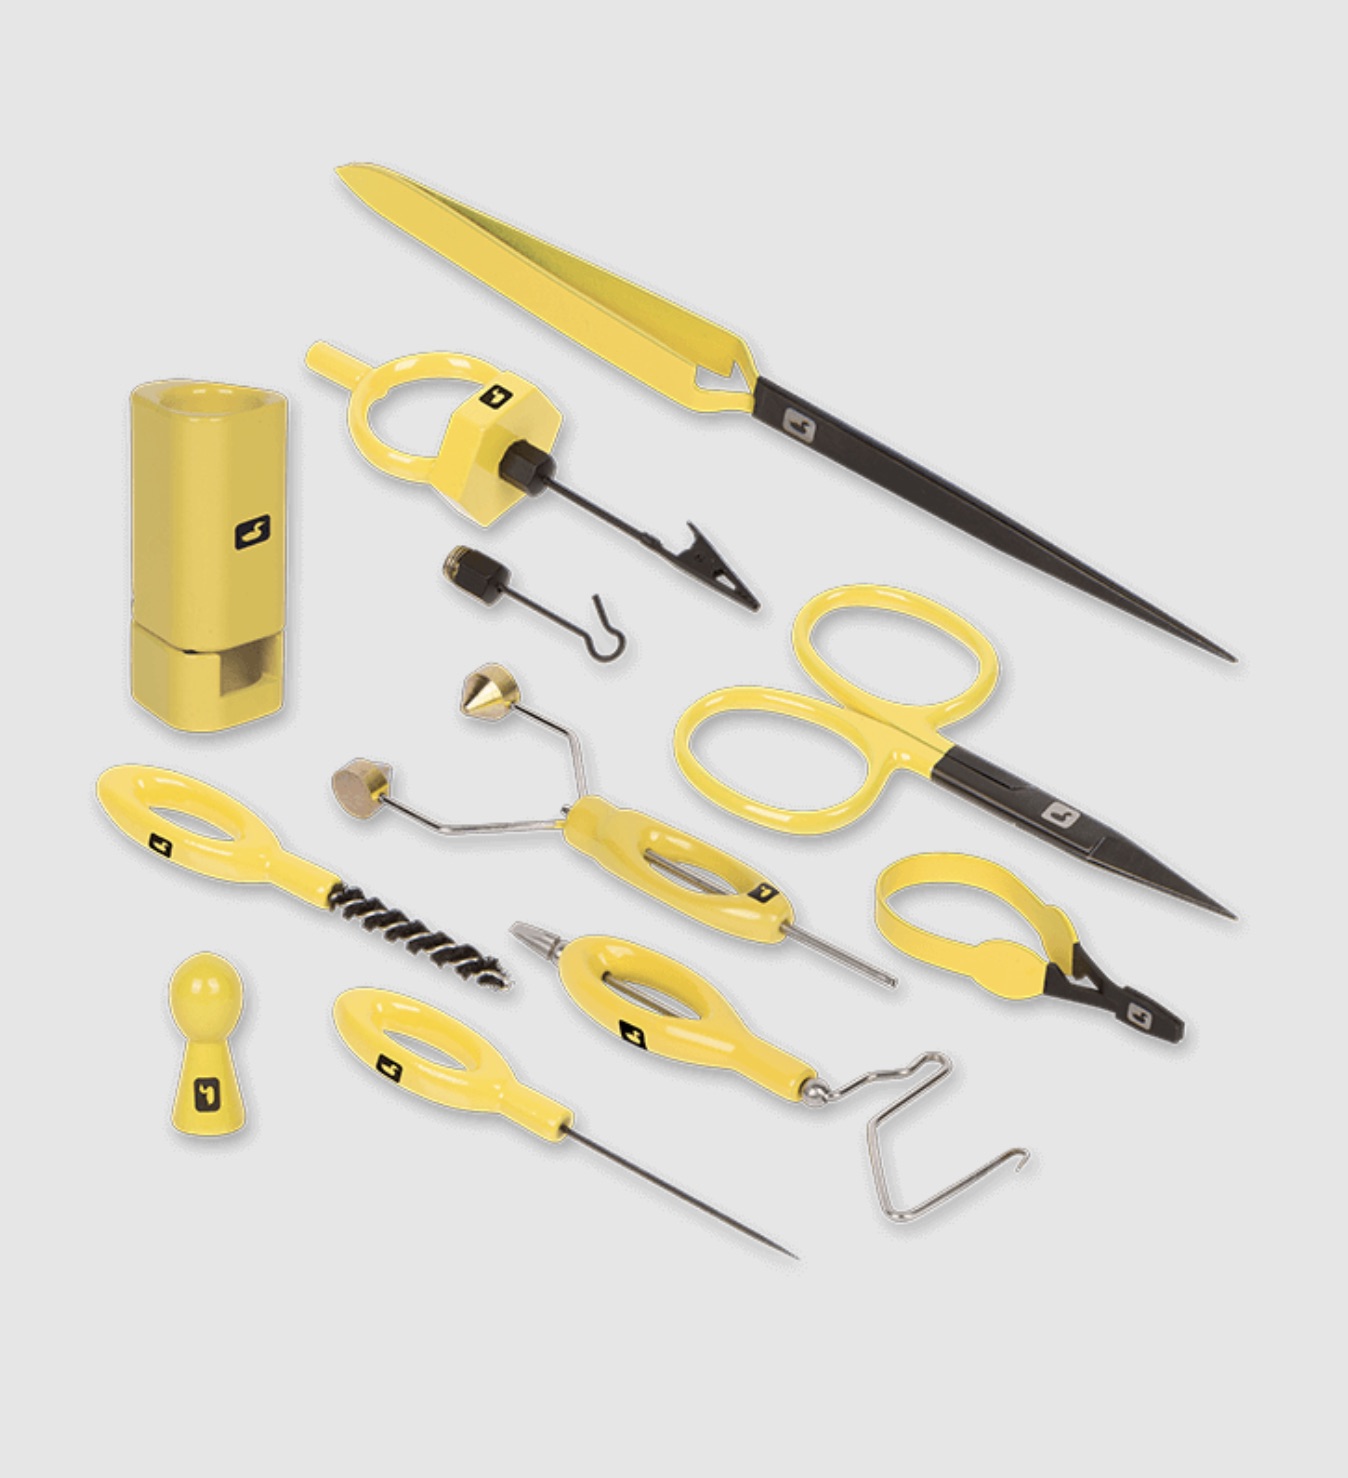 Loon Complete Fly Tying Tool Kit - Click Image to Close